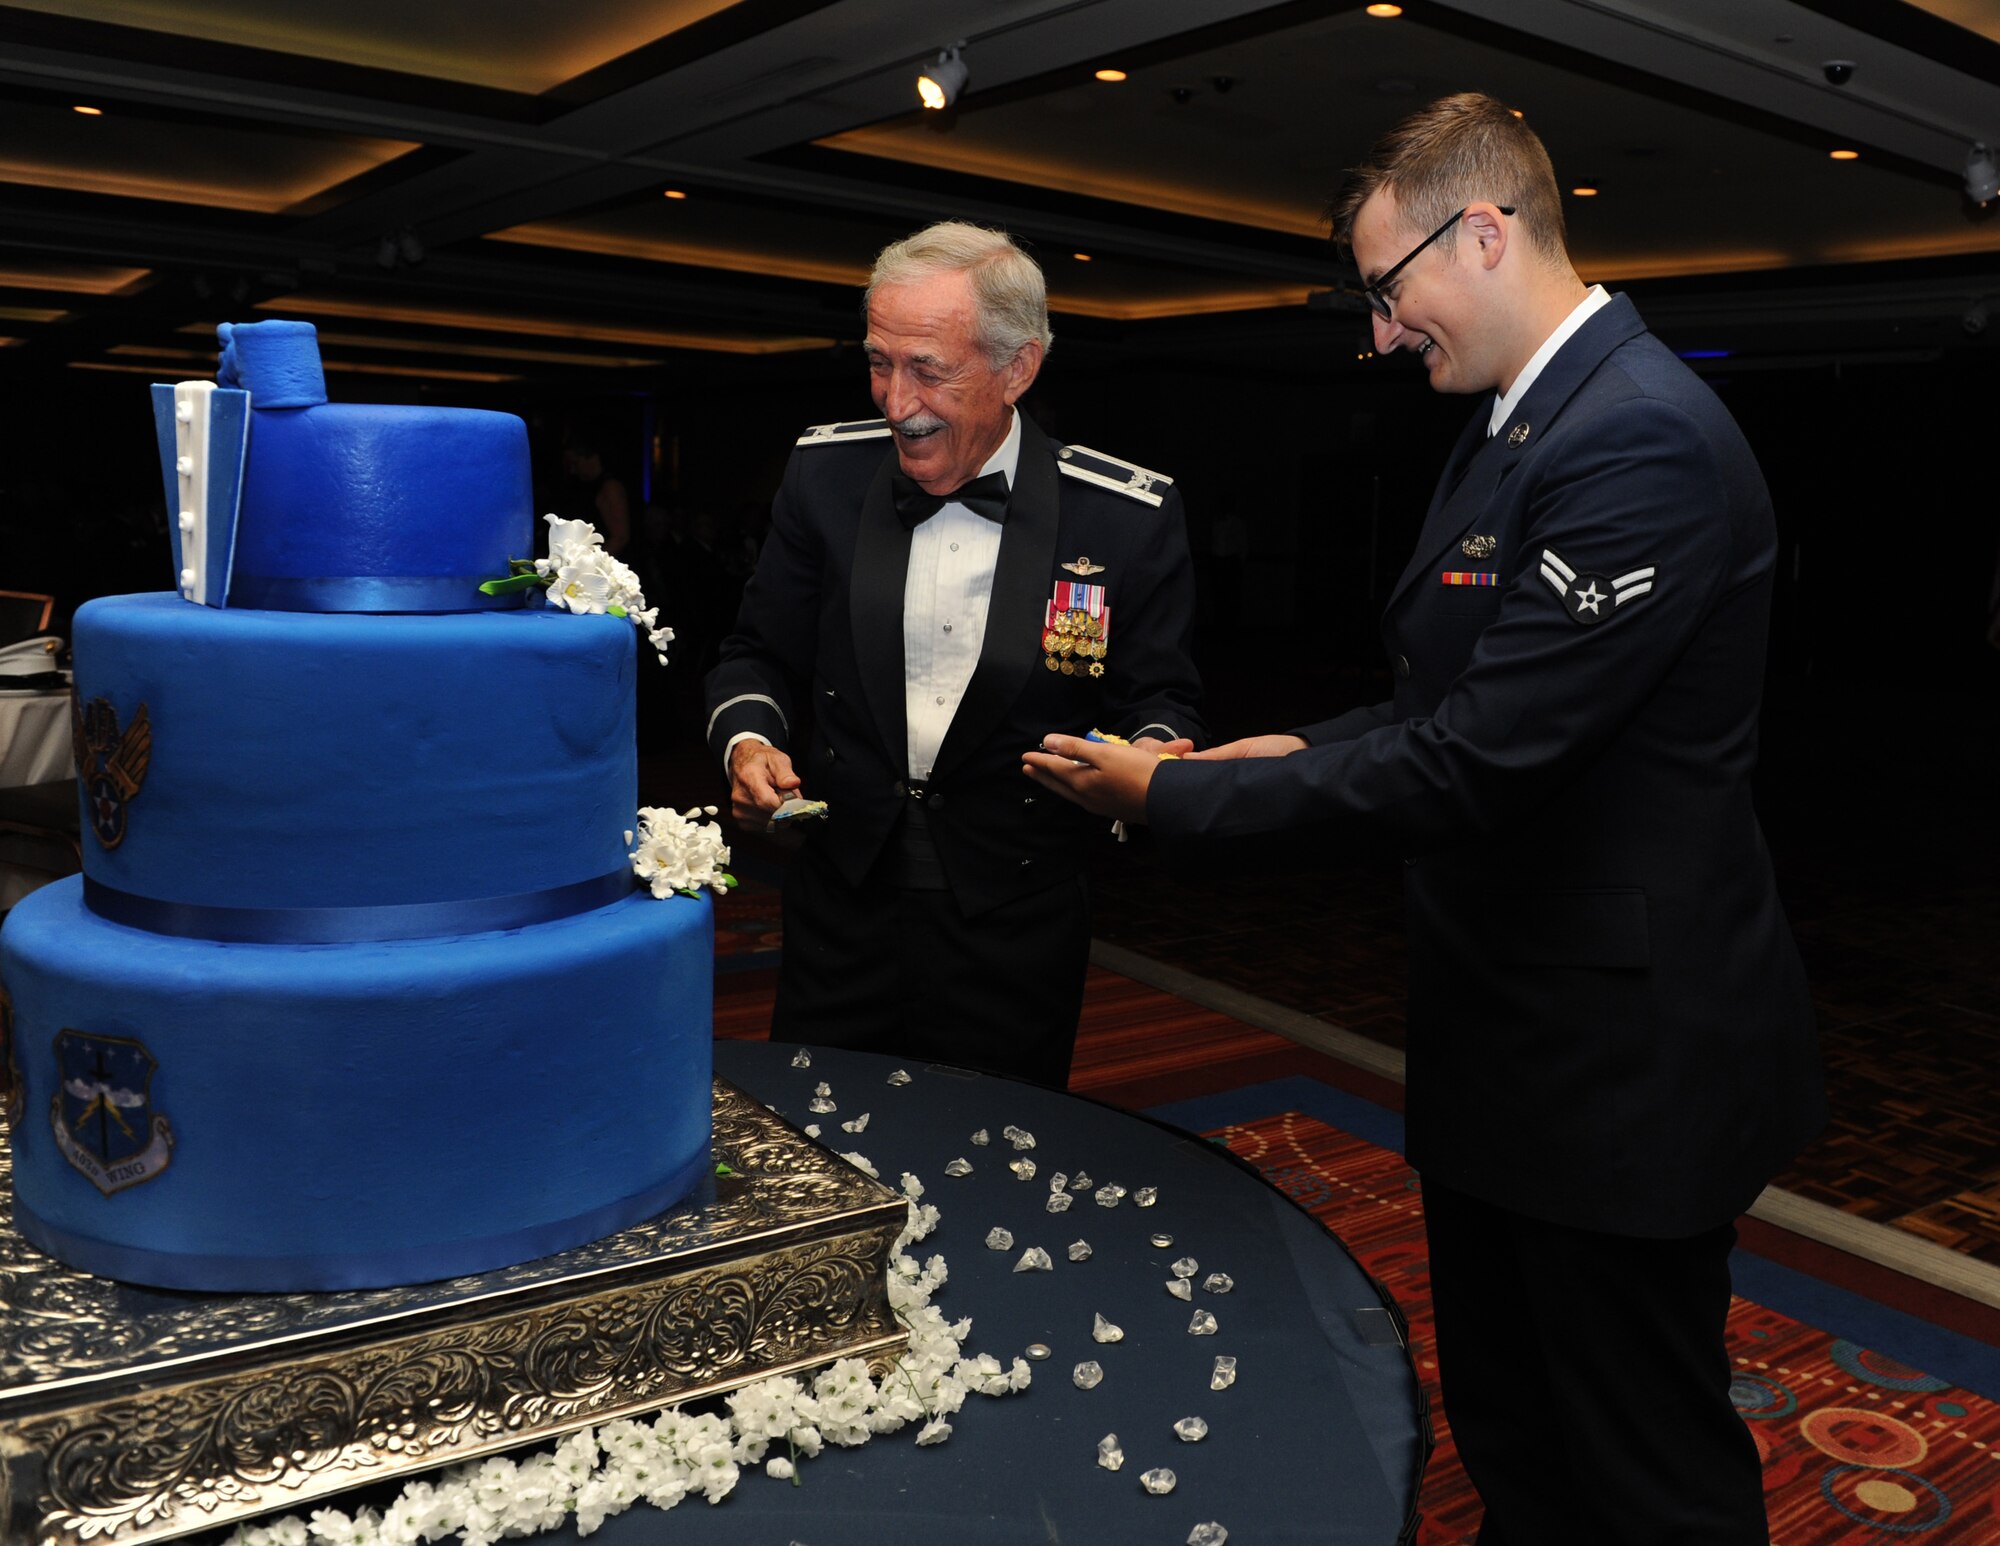 Retired Col. Sid Wright and Airman 1st Class William Henderson, 81st Training Support Squadron network administrator, participate in a cake cutting ceremony during the Keesler Air Force Ball at the Imperial Palace Casino Sept. 24, 2016, Biloxi, Miss. Wright was the oldest Airman at the ball while Henderson was the youngest; it is tradition for the oldest and youngest Airmen in attendance to cut the cake. The event was sponsored by the Air Force Association John C. Stennis Chapter #332 to celebrate the Air Force’s 69th birthday and the base’s 75th anniversary. (U.S. Air Force photo by Kemberly Groue)